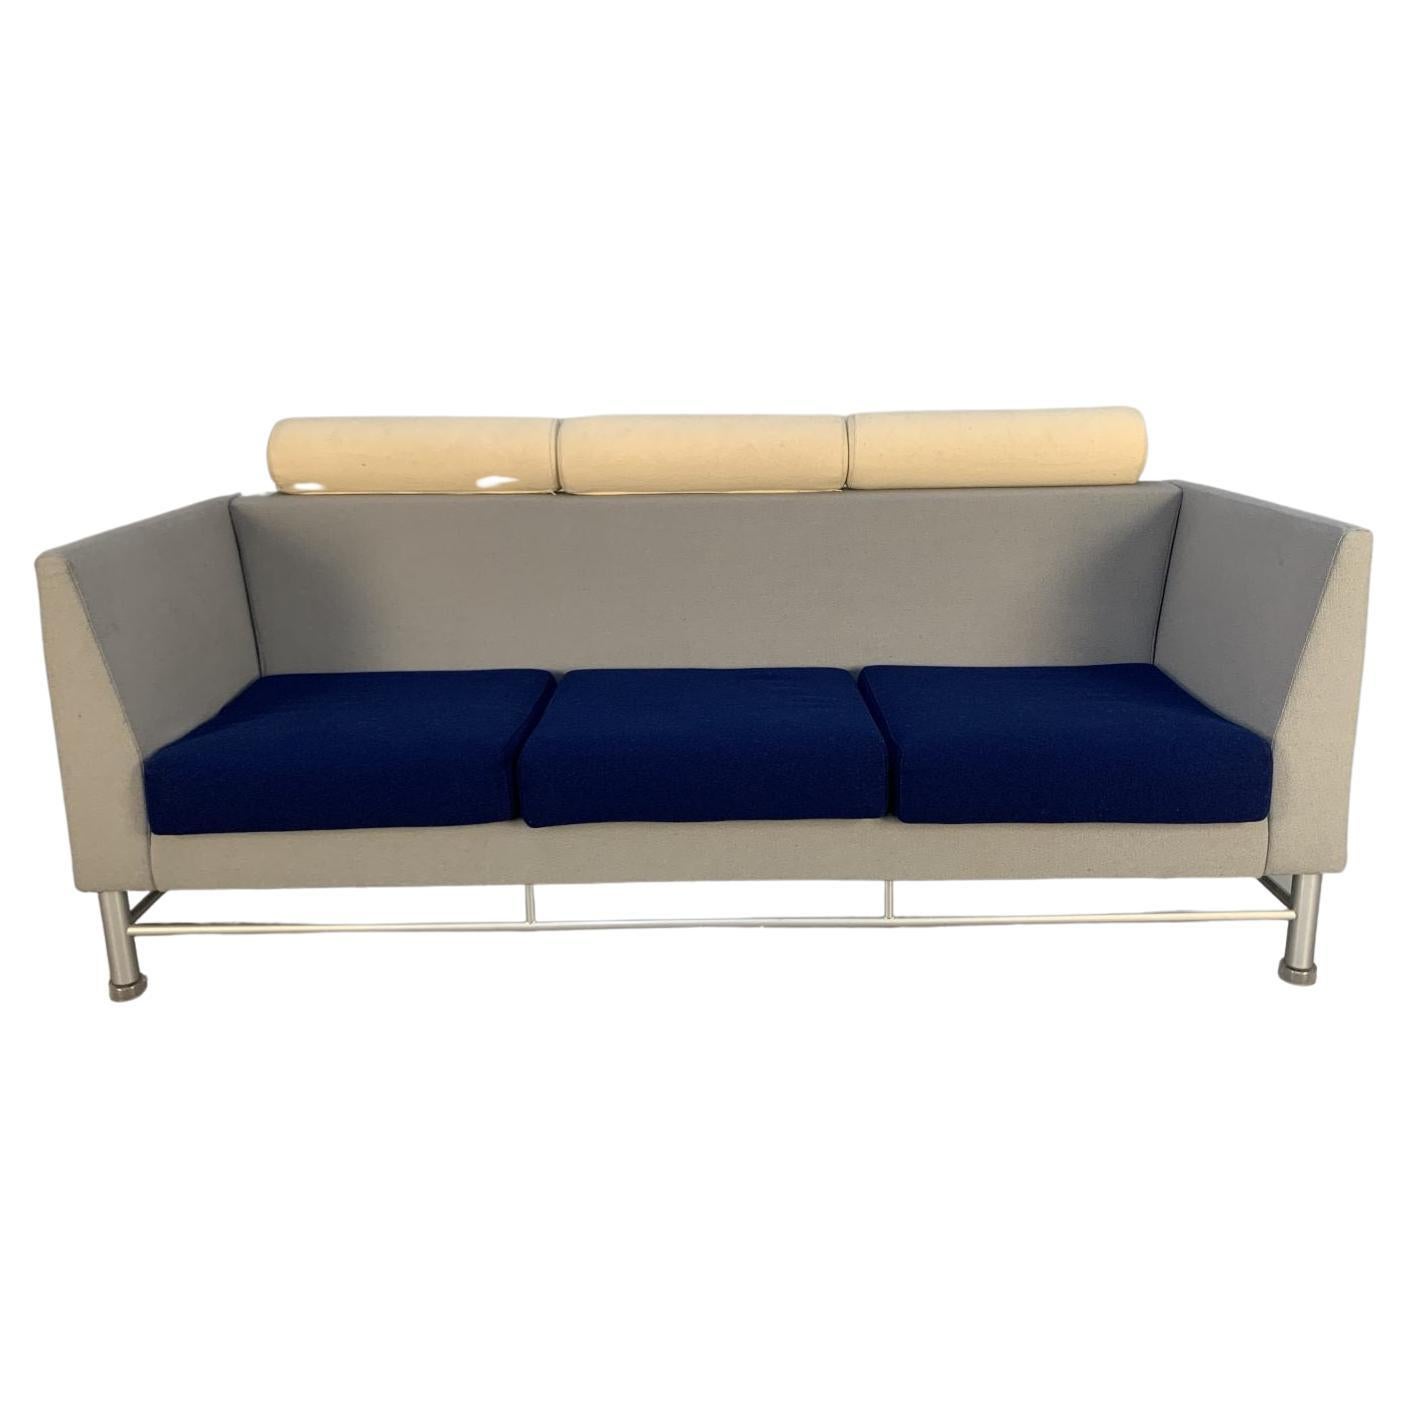 Sublime Rare Knoll “East Side” Sofa by Ettore Sottsass in Blue and Grey Wool